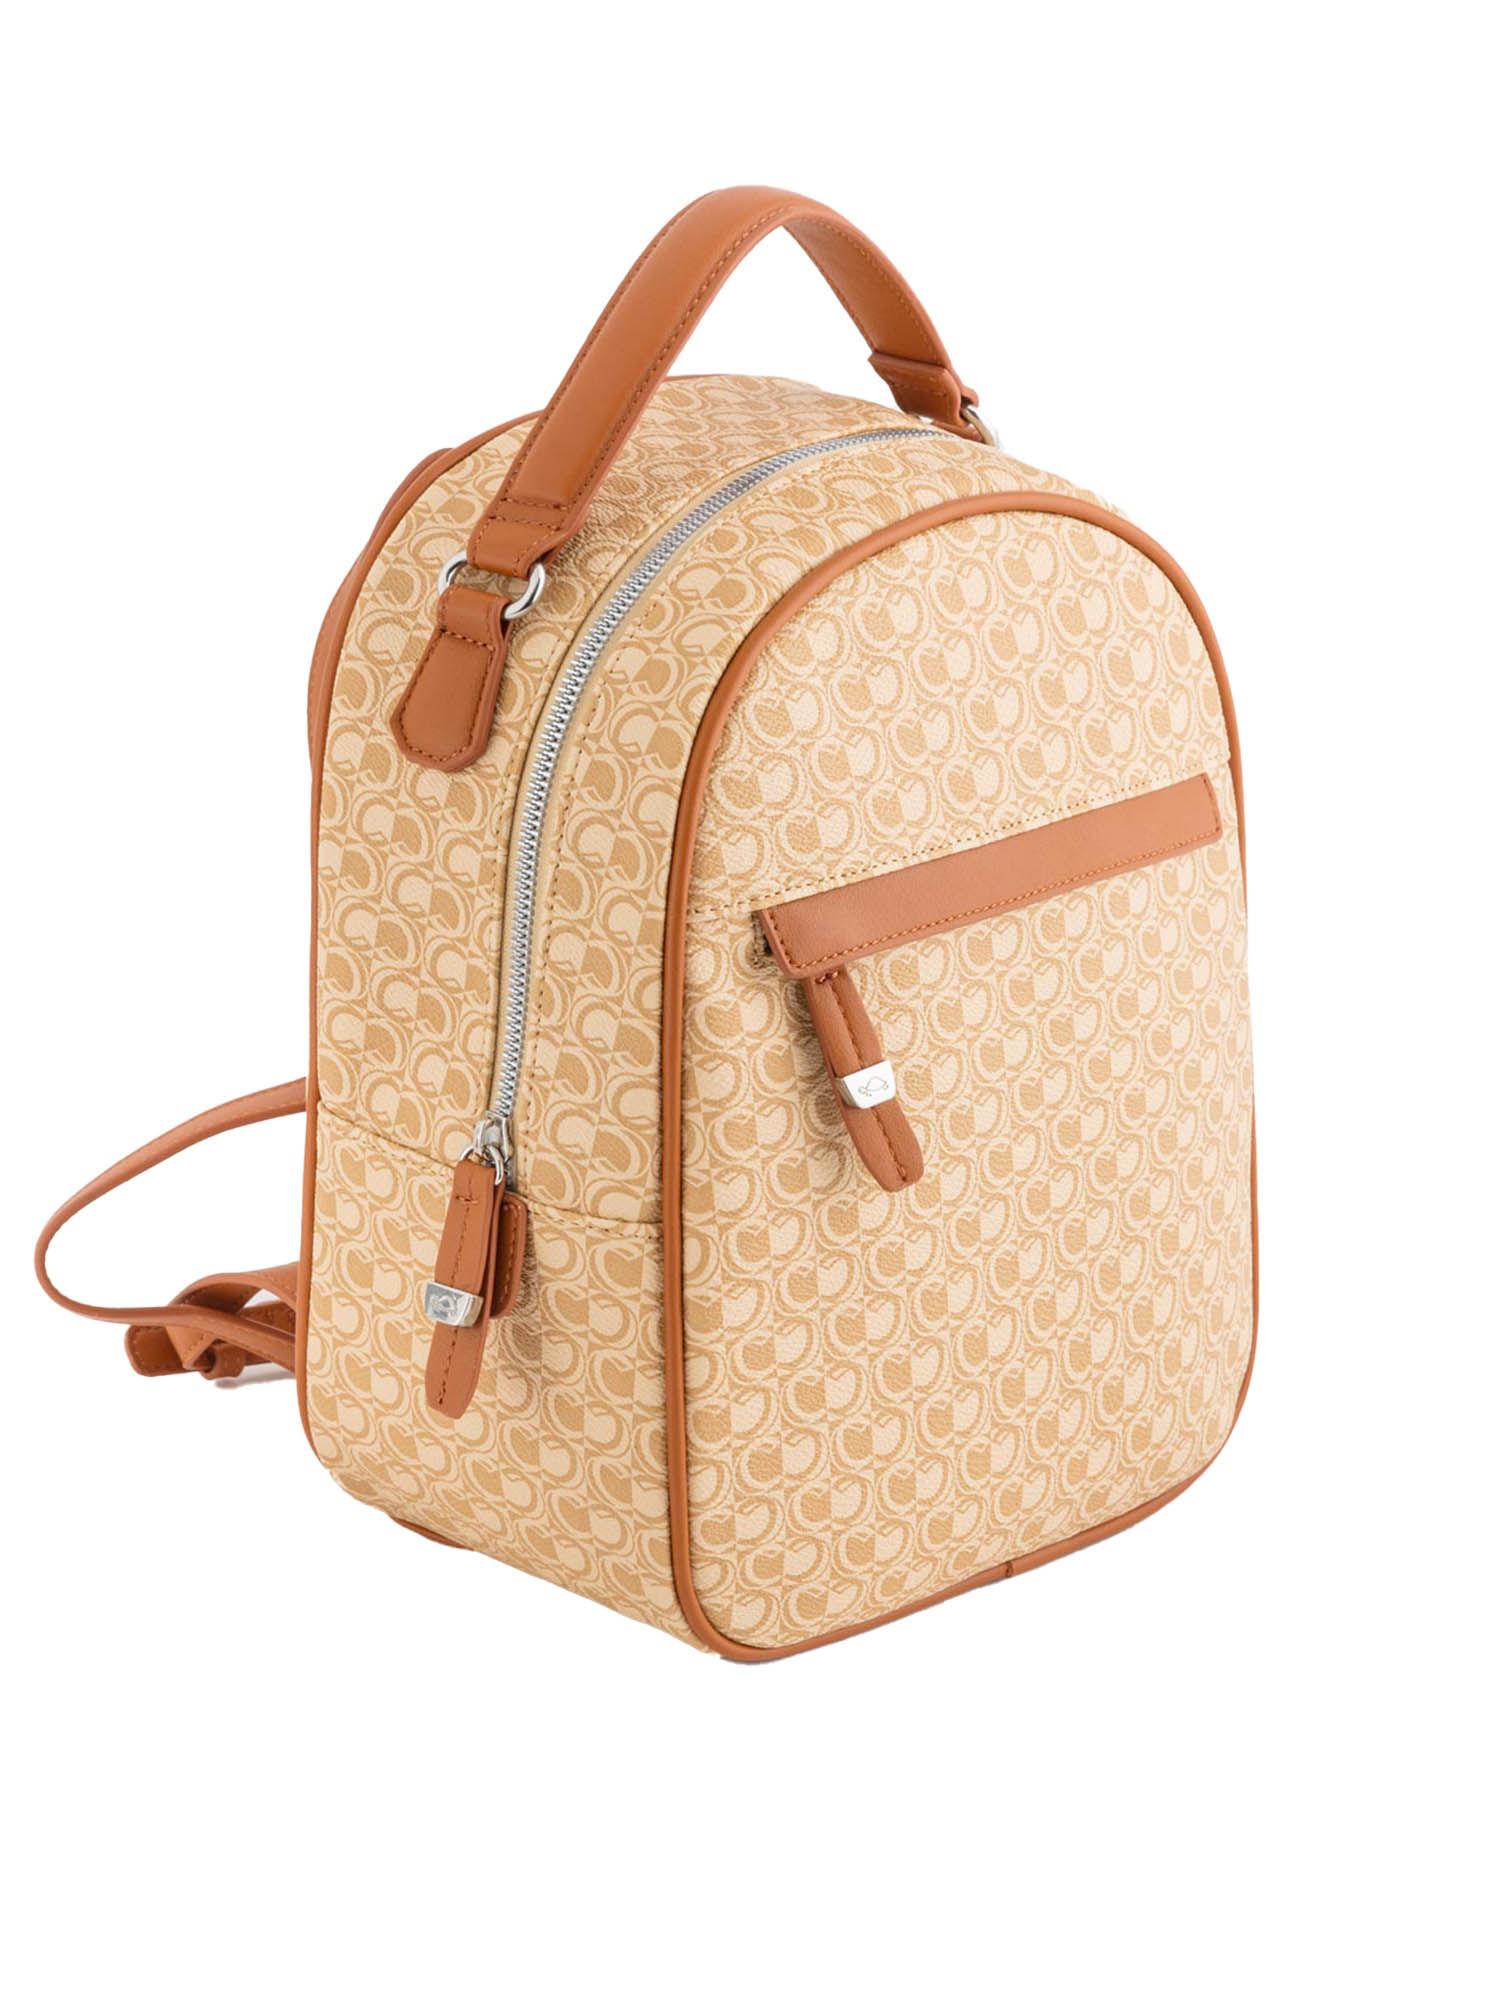 stylish backpack - brown